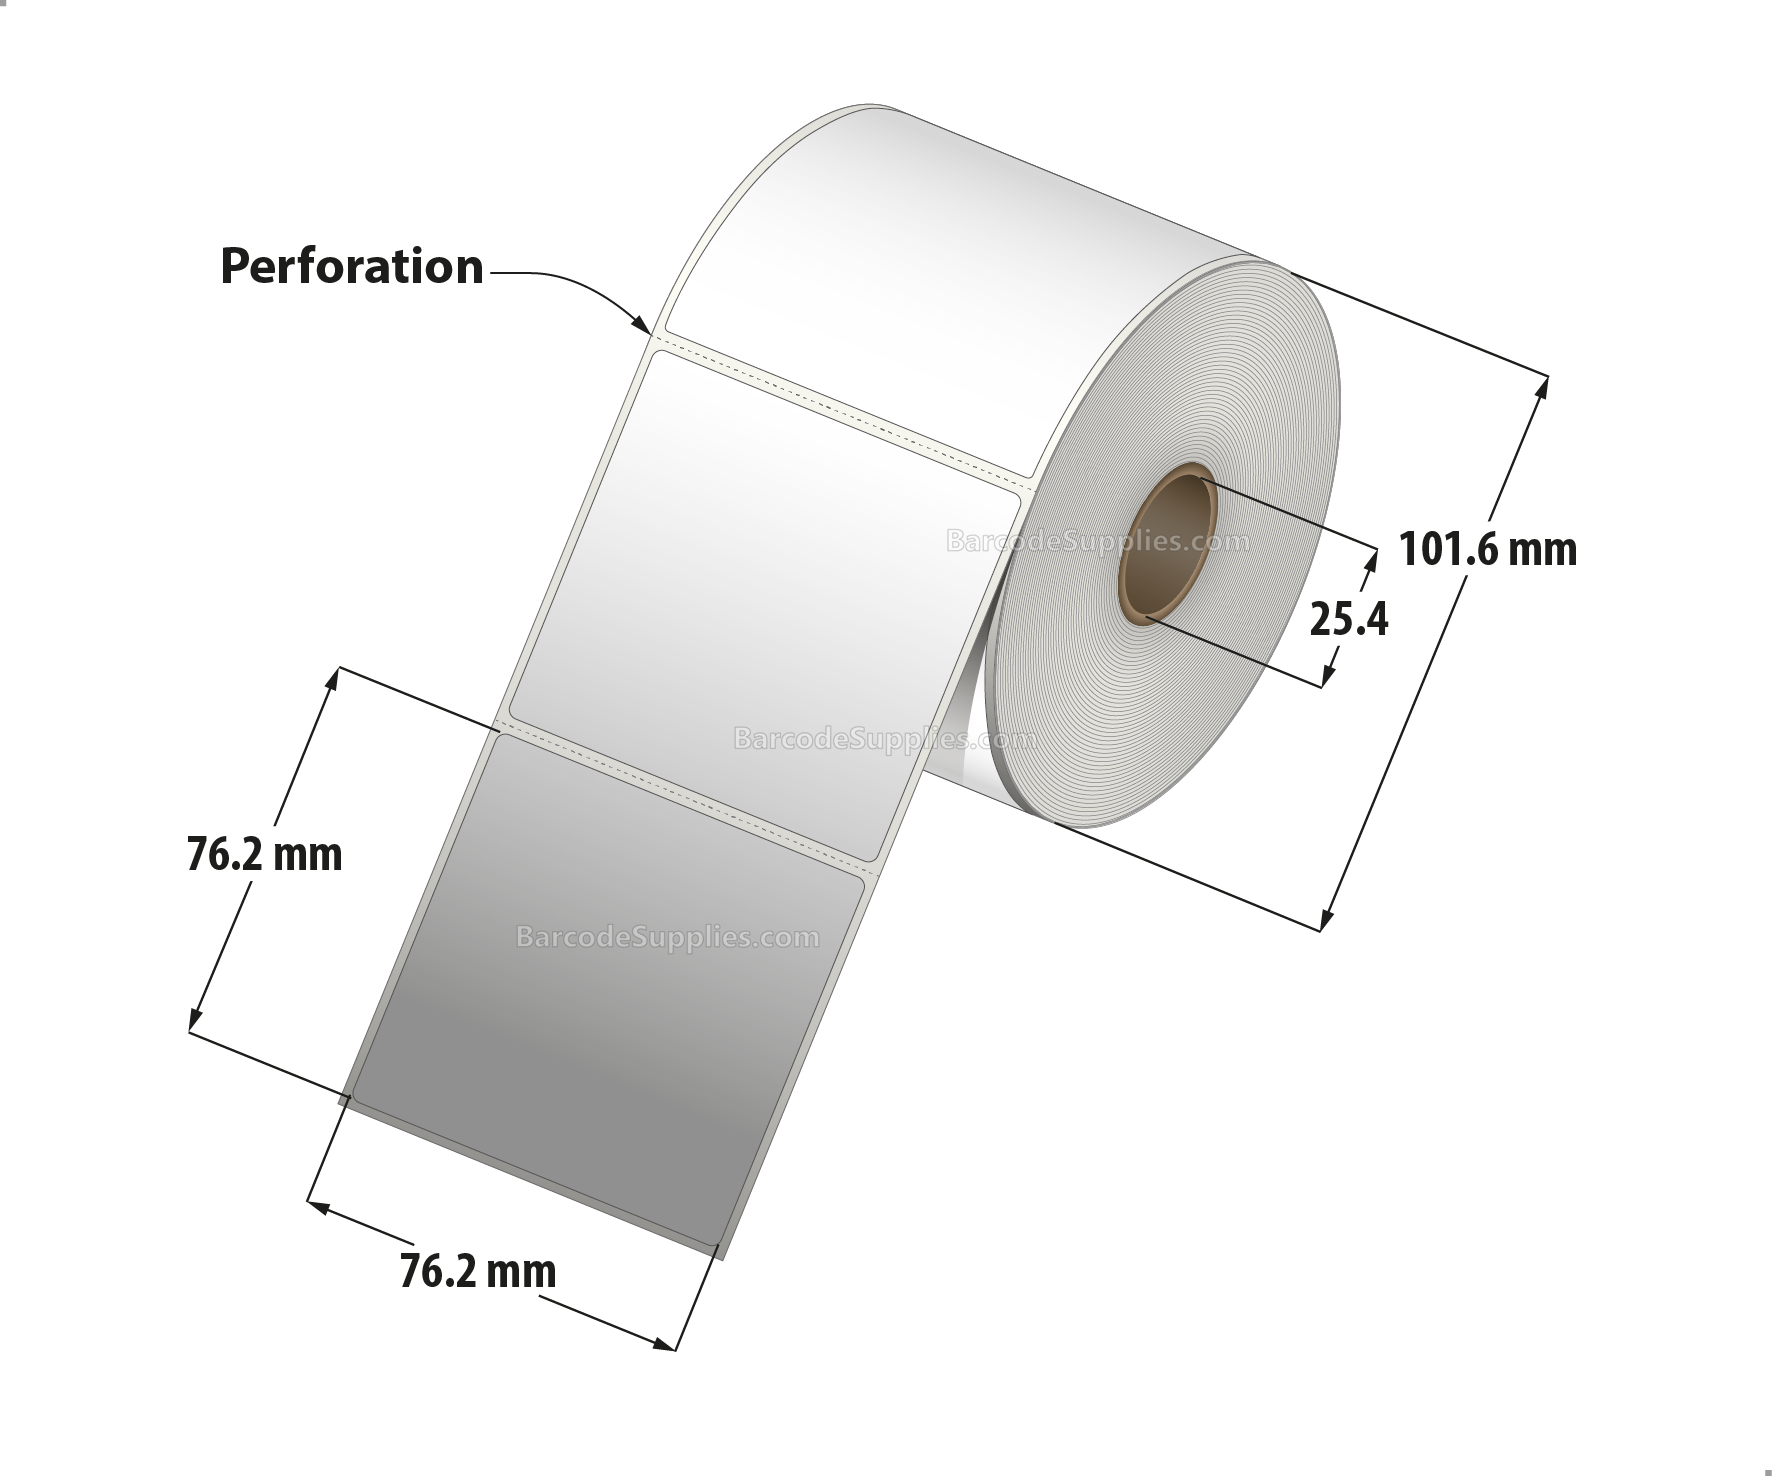 3 x 3 Thermal Transfer White Labels With Permanent Acrylic Adhesive - Perforated - 500 Labels Per Roll - Carton Of 4 Rolls - 2000 Labels Total - MPN: TH33-14PTT